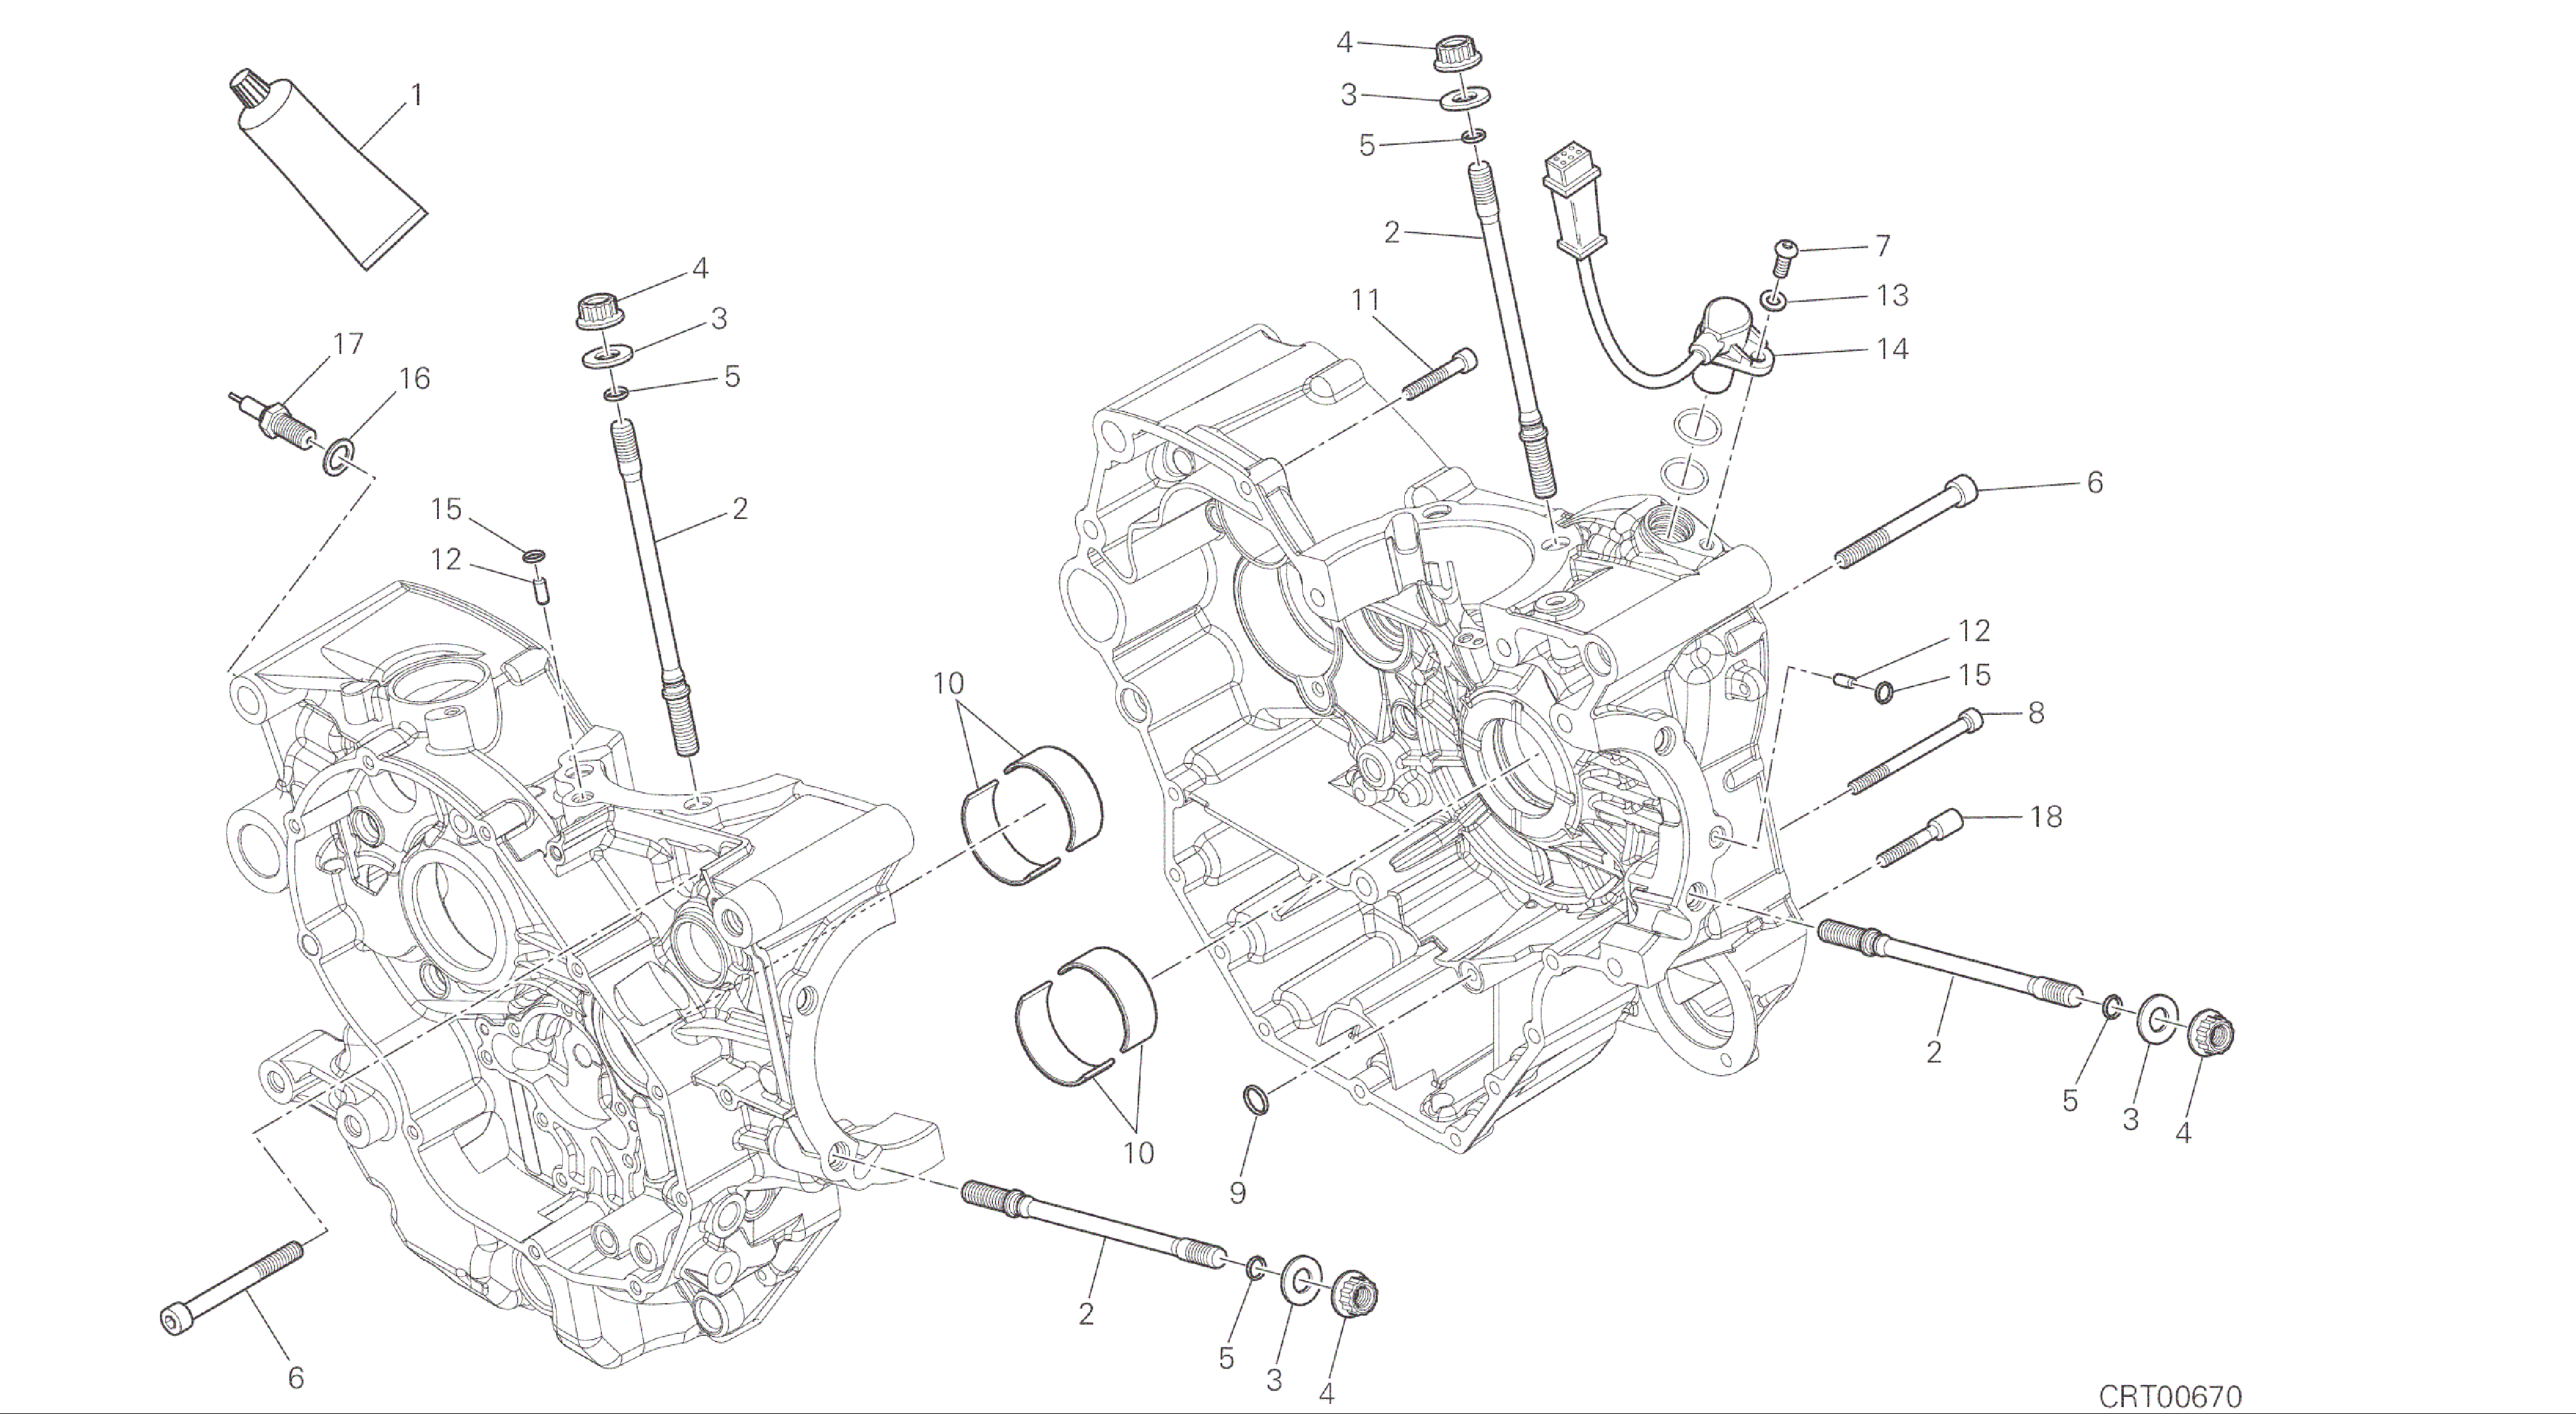 DRAWING 10A - HALF-CRANKCASES PAIR [MOD:M 821]GROUP ENGINE